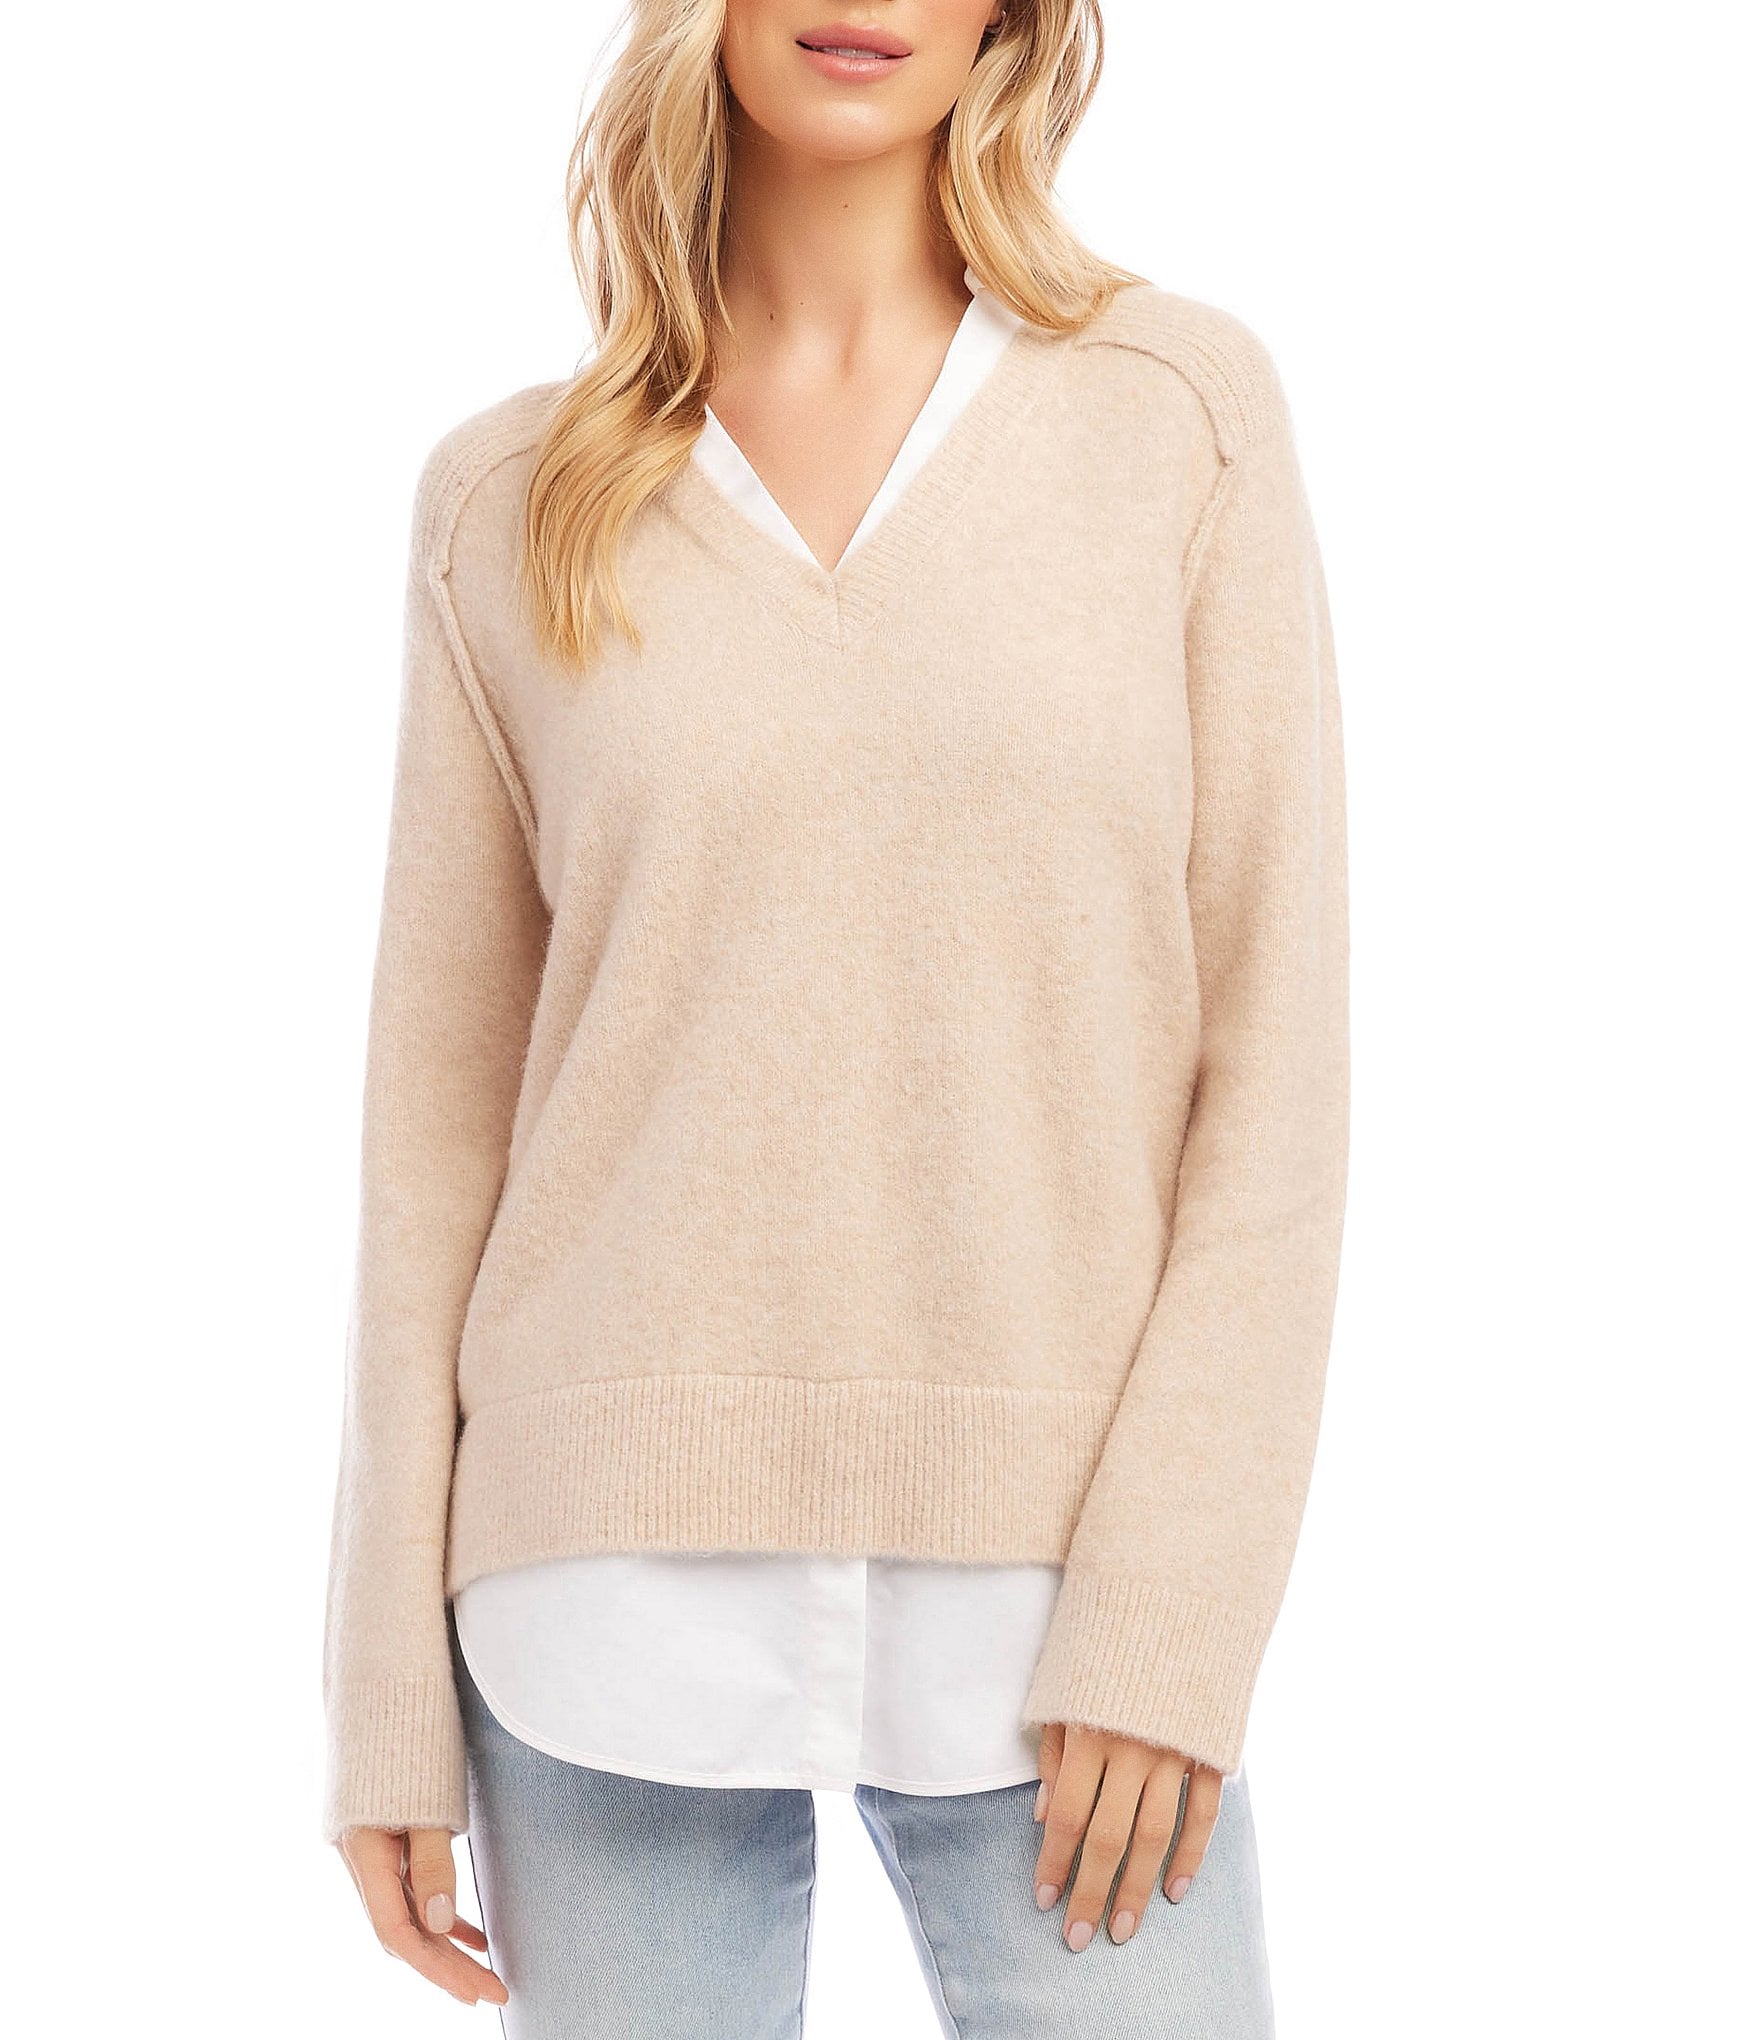 Karen Kane Layered Knit Point Collar V-Neck Long Sleeve Contrasting Ribbed Knit Sweater Top ...